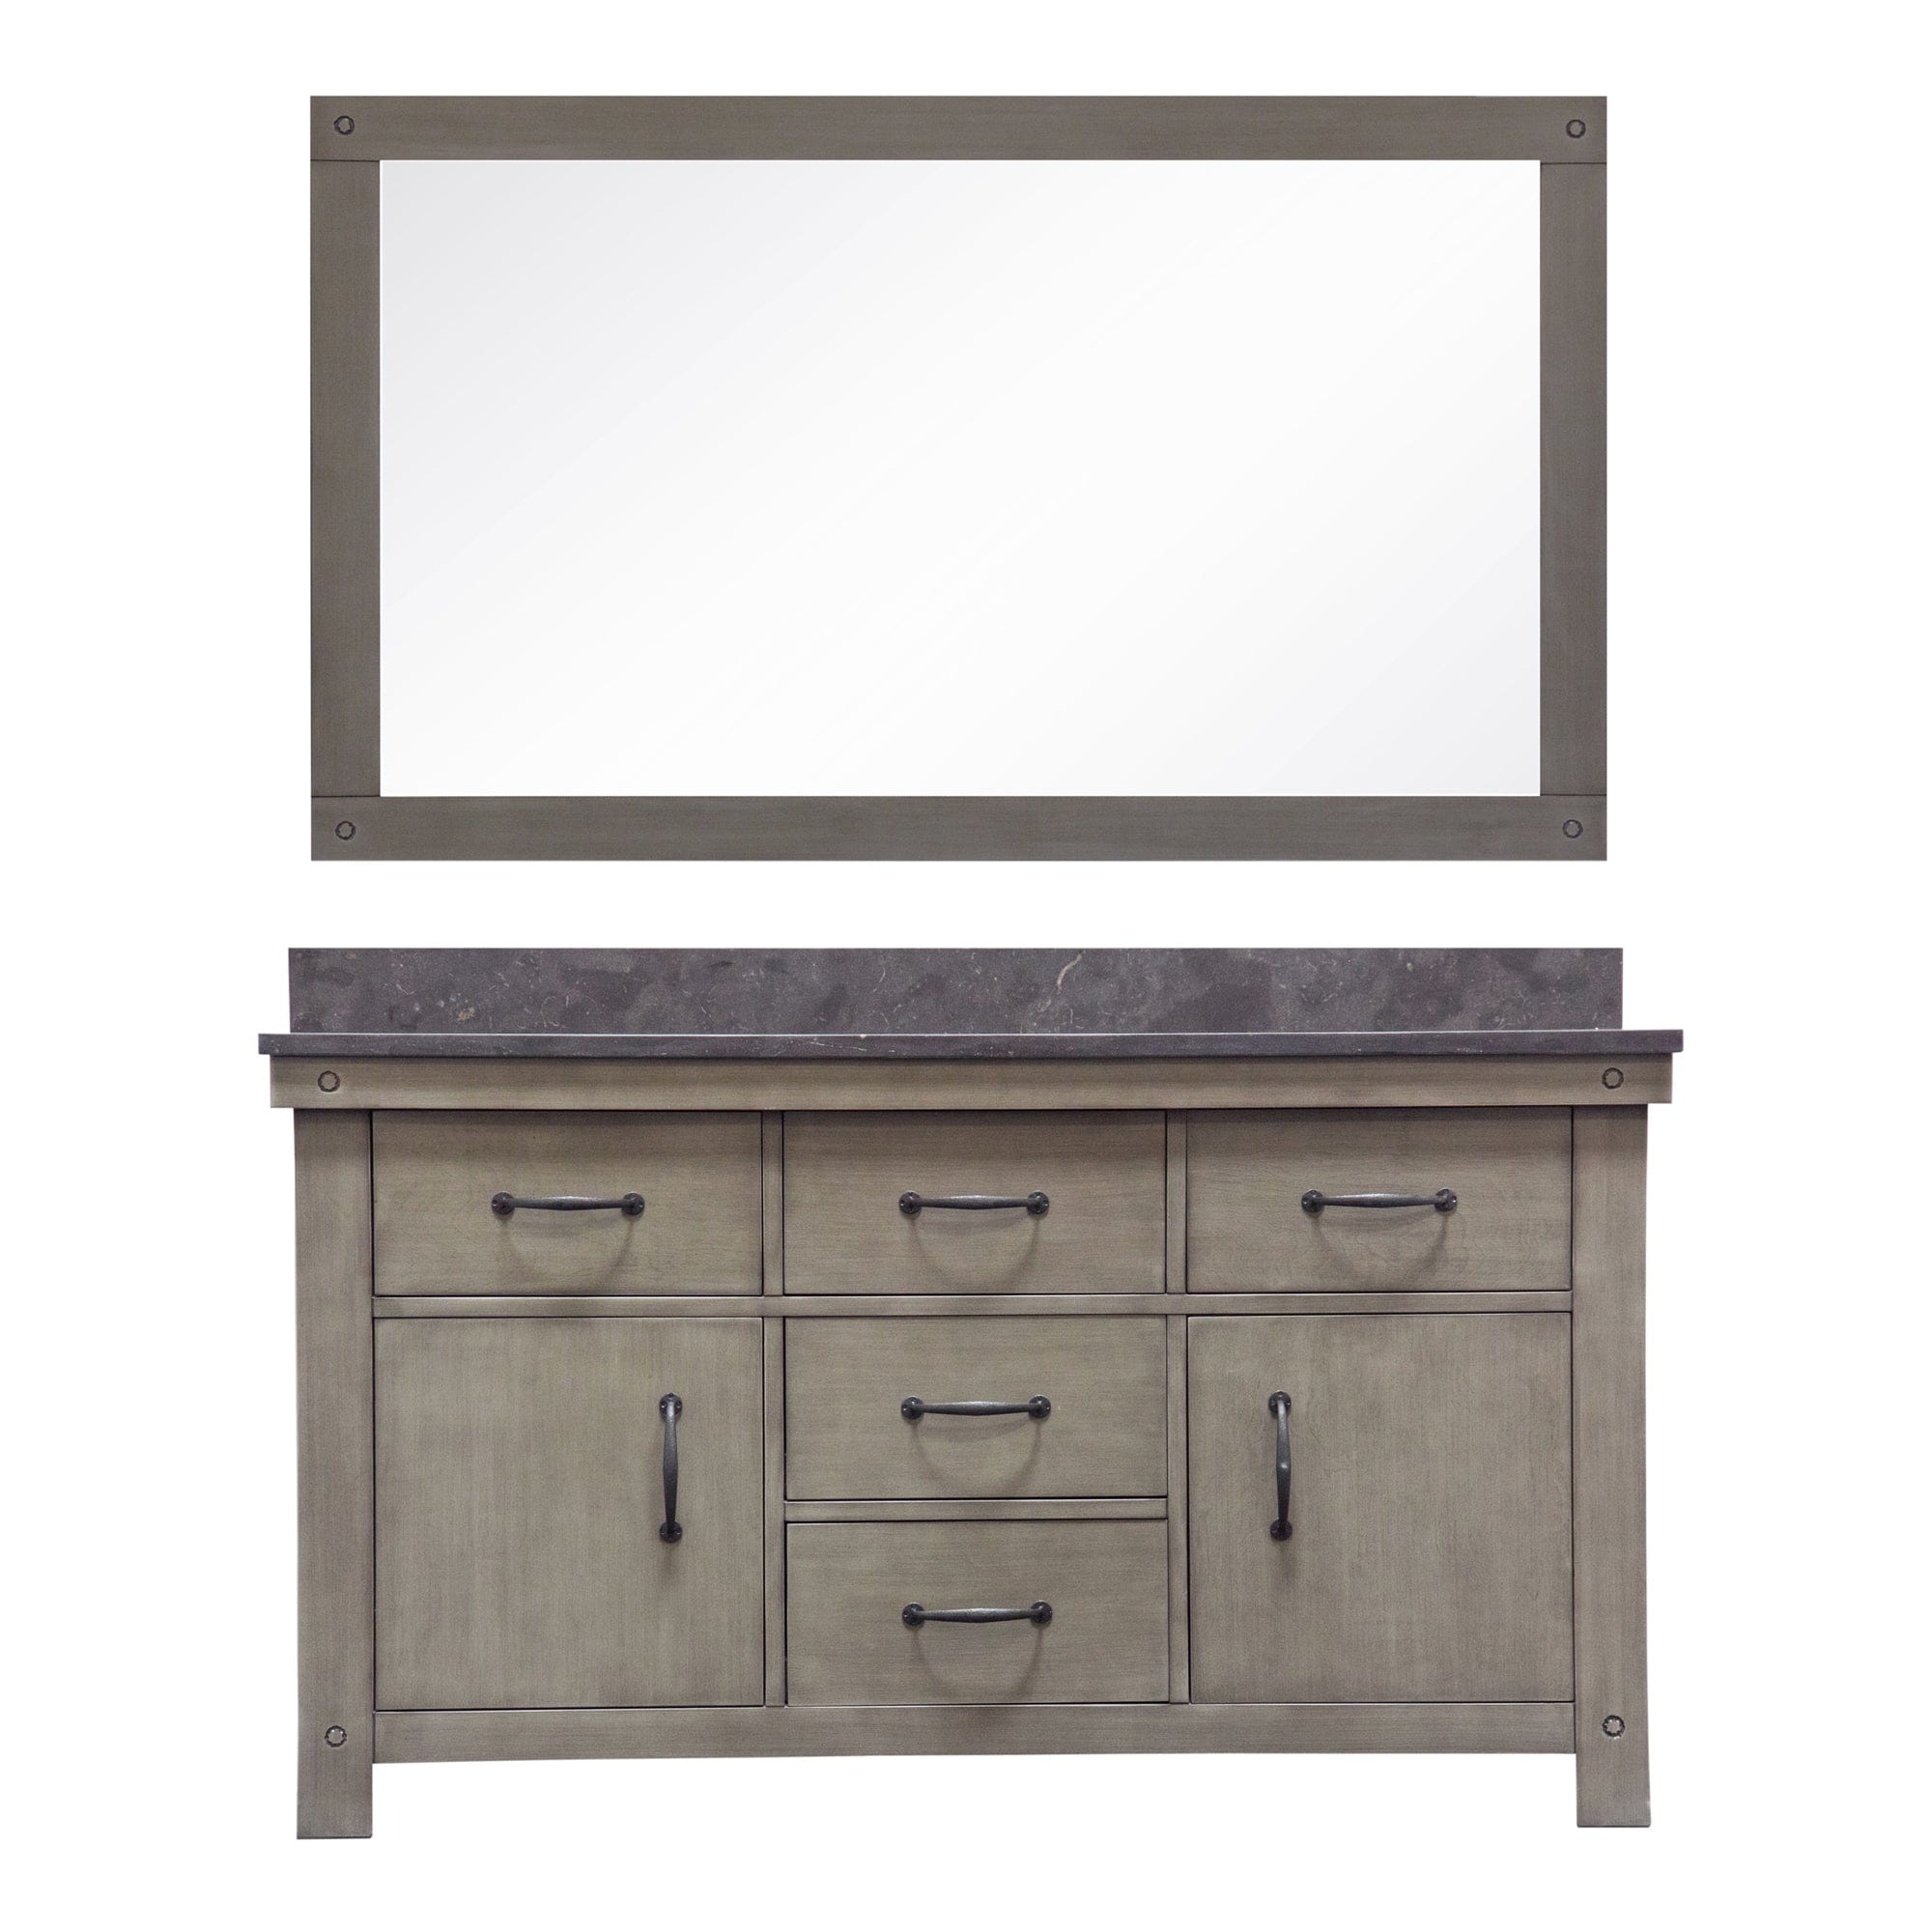 60 Inch Grizzle Grey Double Sink Bathroom Vanity With Mirror And Faucets With Blue Limestone Counter Top From The ABERDEEN Collection - Molaix732030749702Bathroom VanitiesAB60BL03GG-A60BX1203